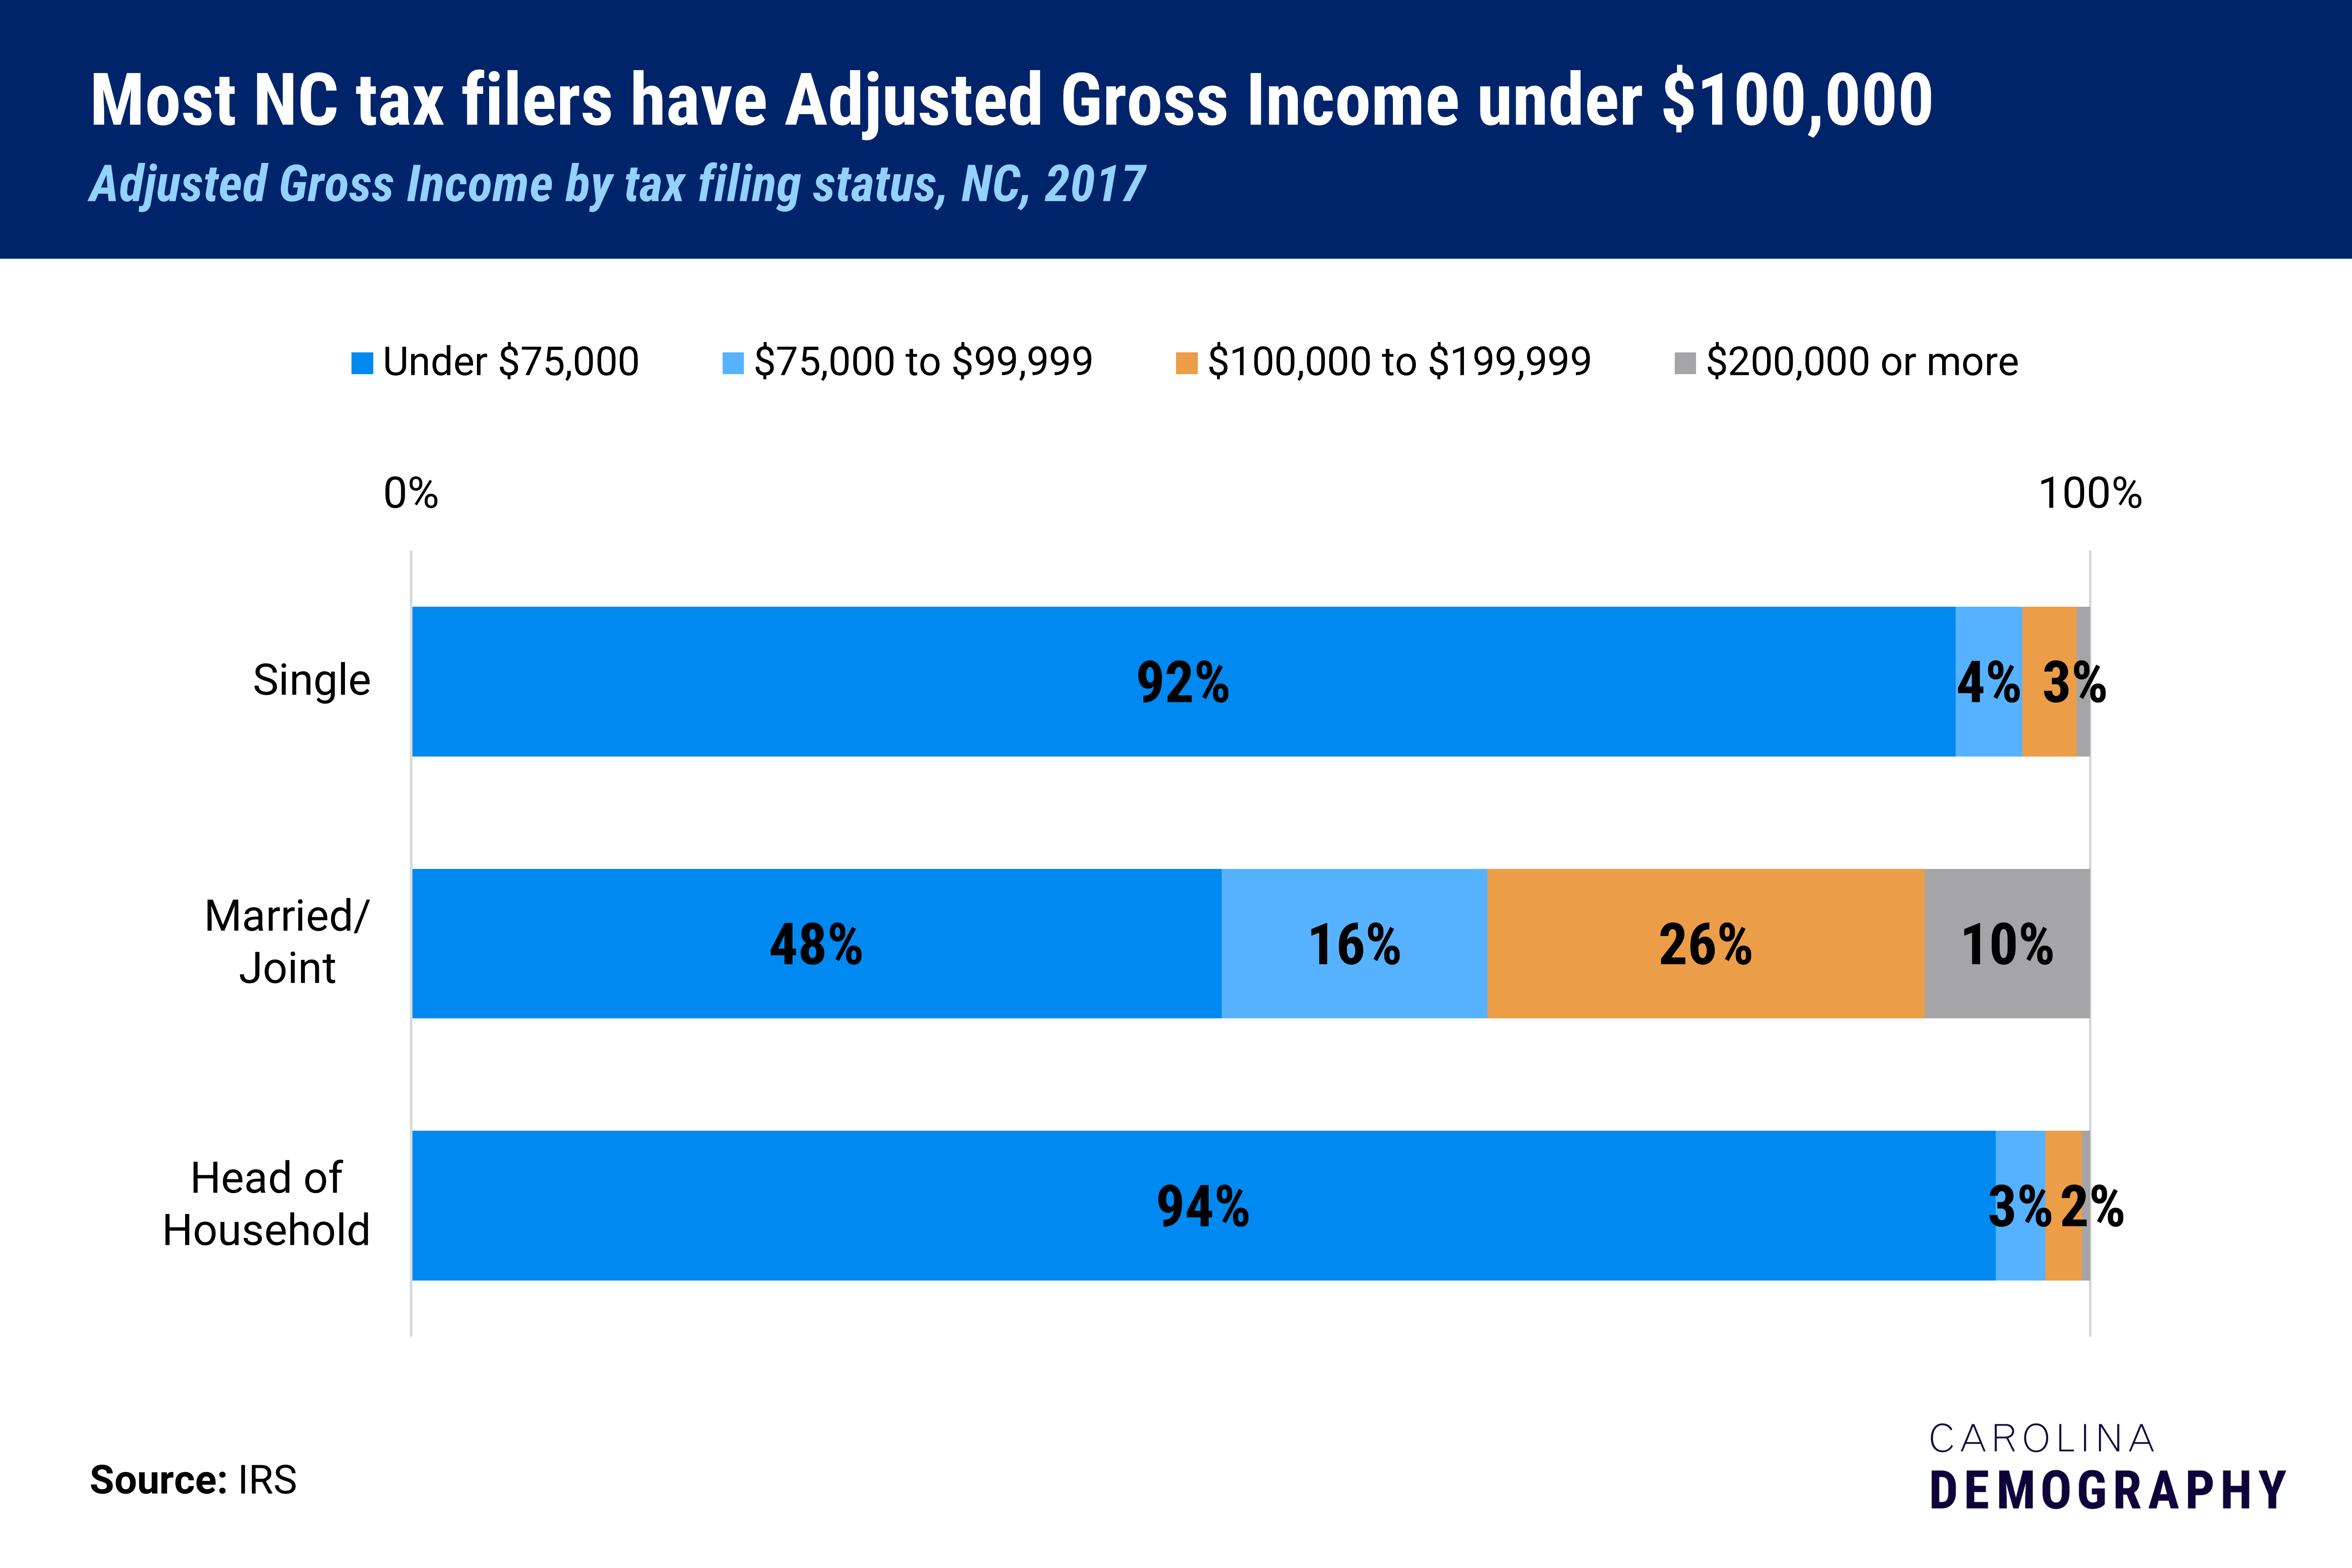 Chart Title: Most NC tax filers have AGI under $100,000 Subtitle: Adjusted gross income by tax filing status, NC, 2017 Source: IRS